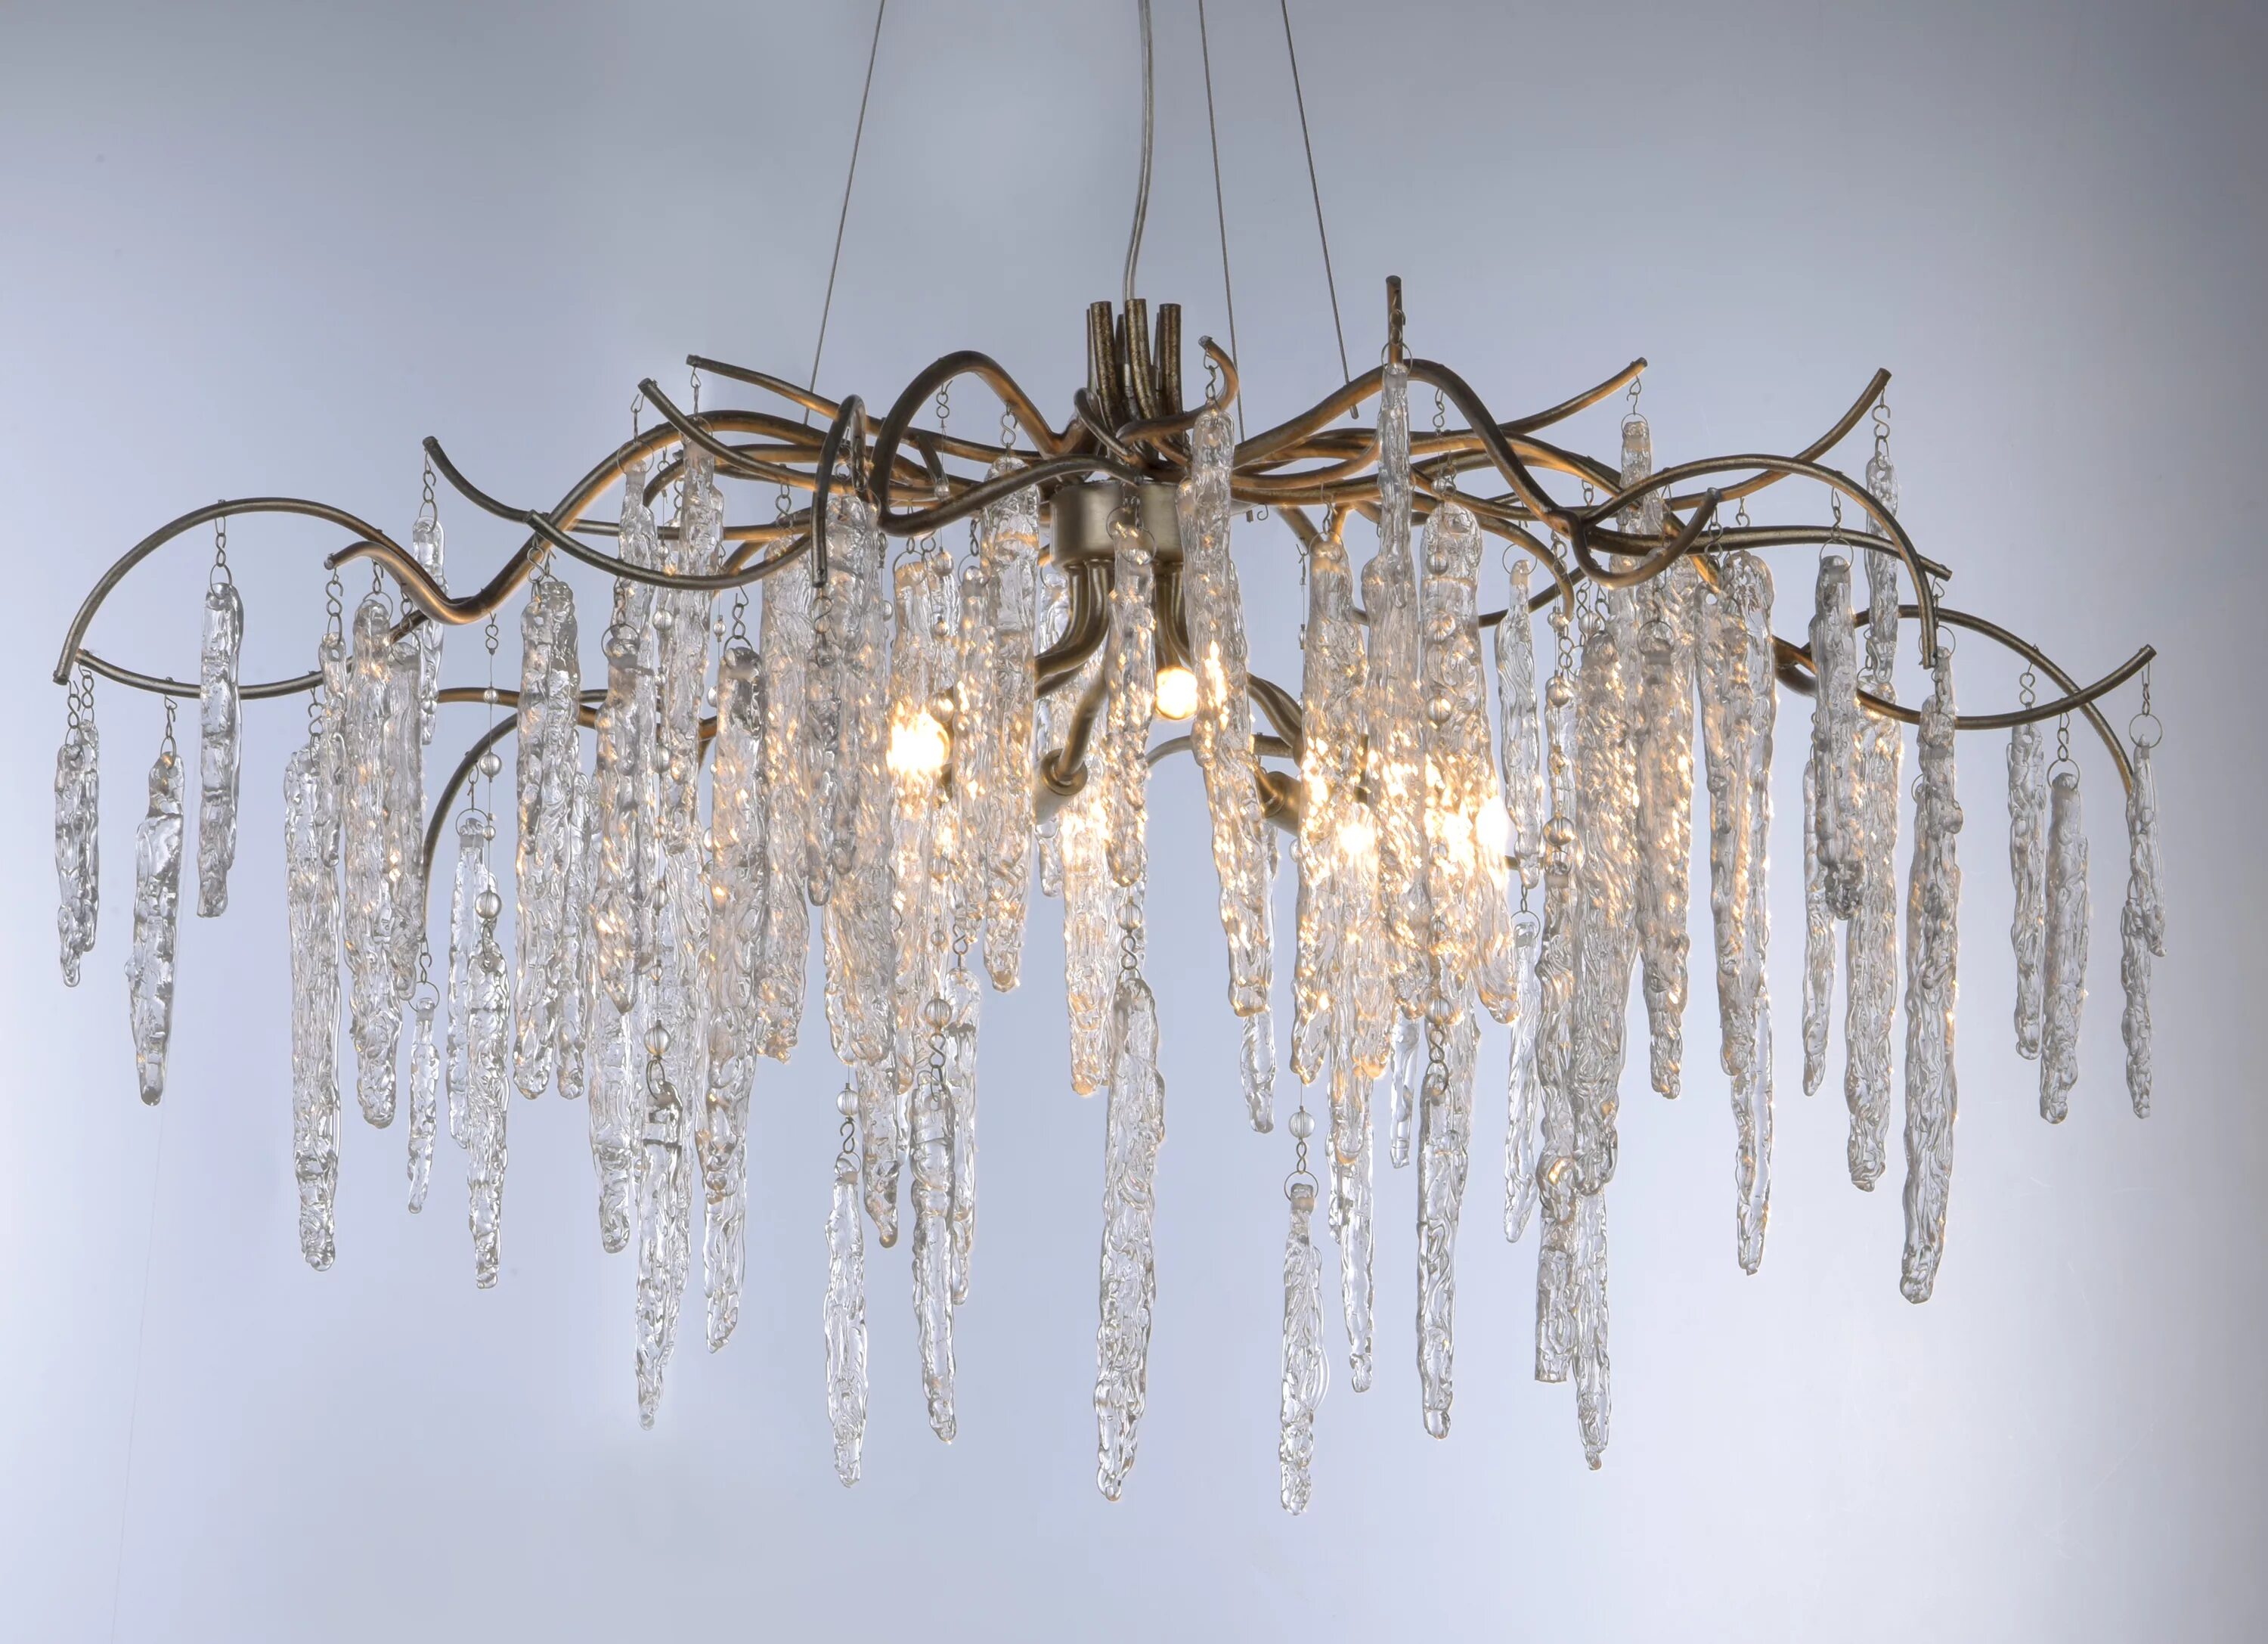 Light included. Люстра Willow chandelier26284icsgsilver Gold / icebulb included. Люстра Orabel Chandelier. Люстра Willow люстра Willow 8-Light 26284icsg. Люстра Willow Double tear Chandelier.